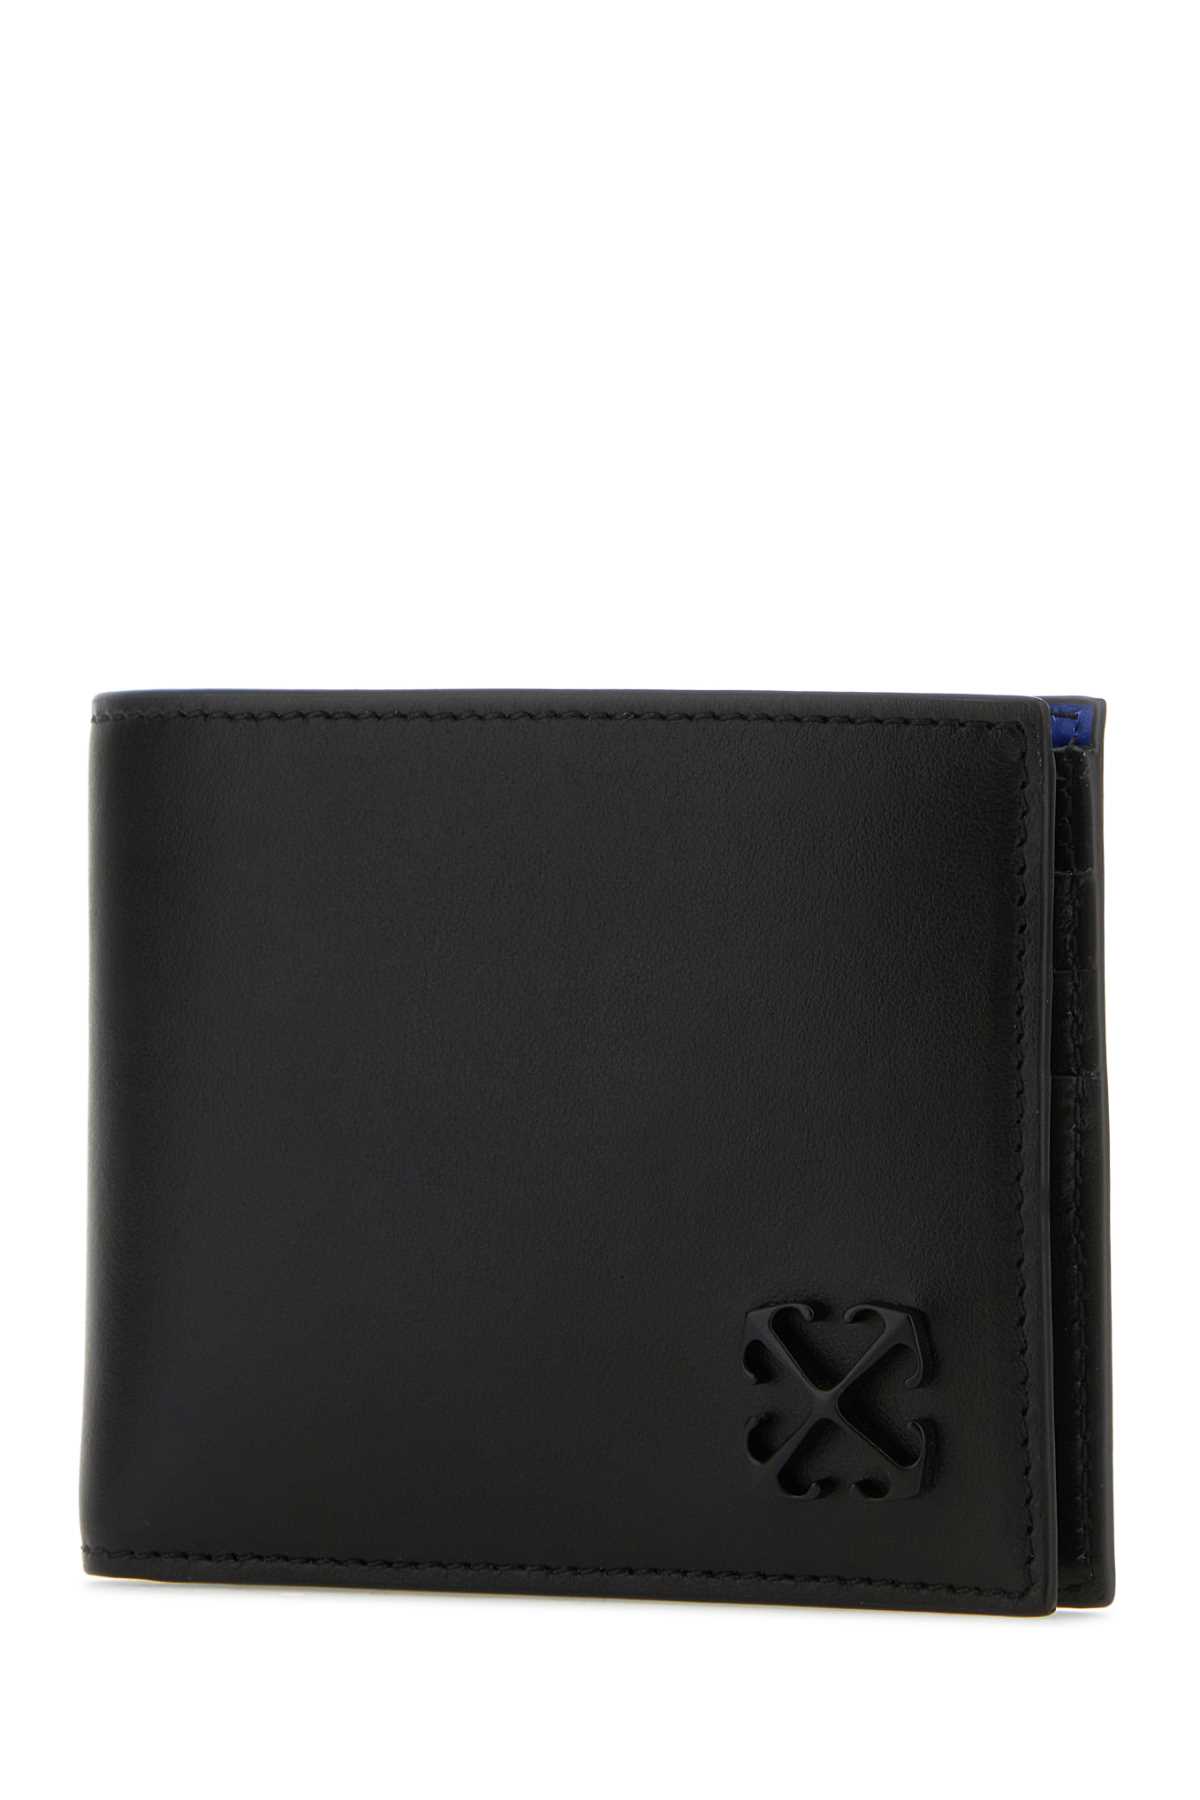 OFF-WHITE BLACK LEATHER WALLET